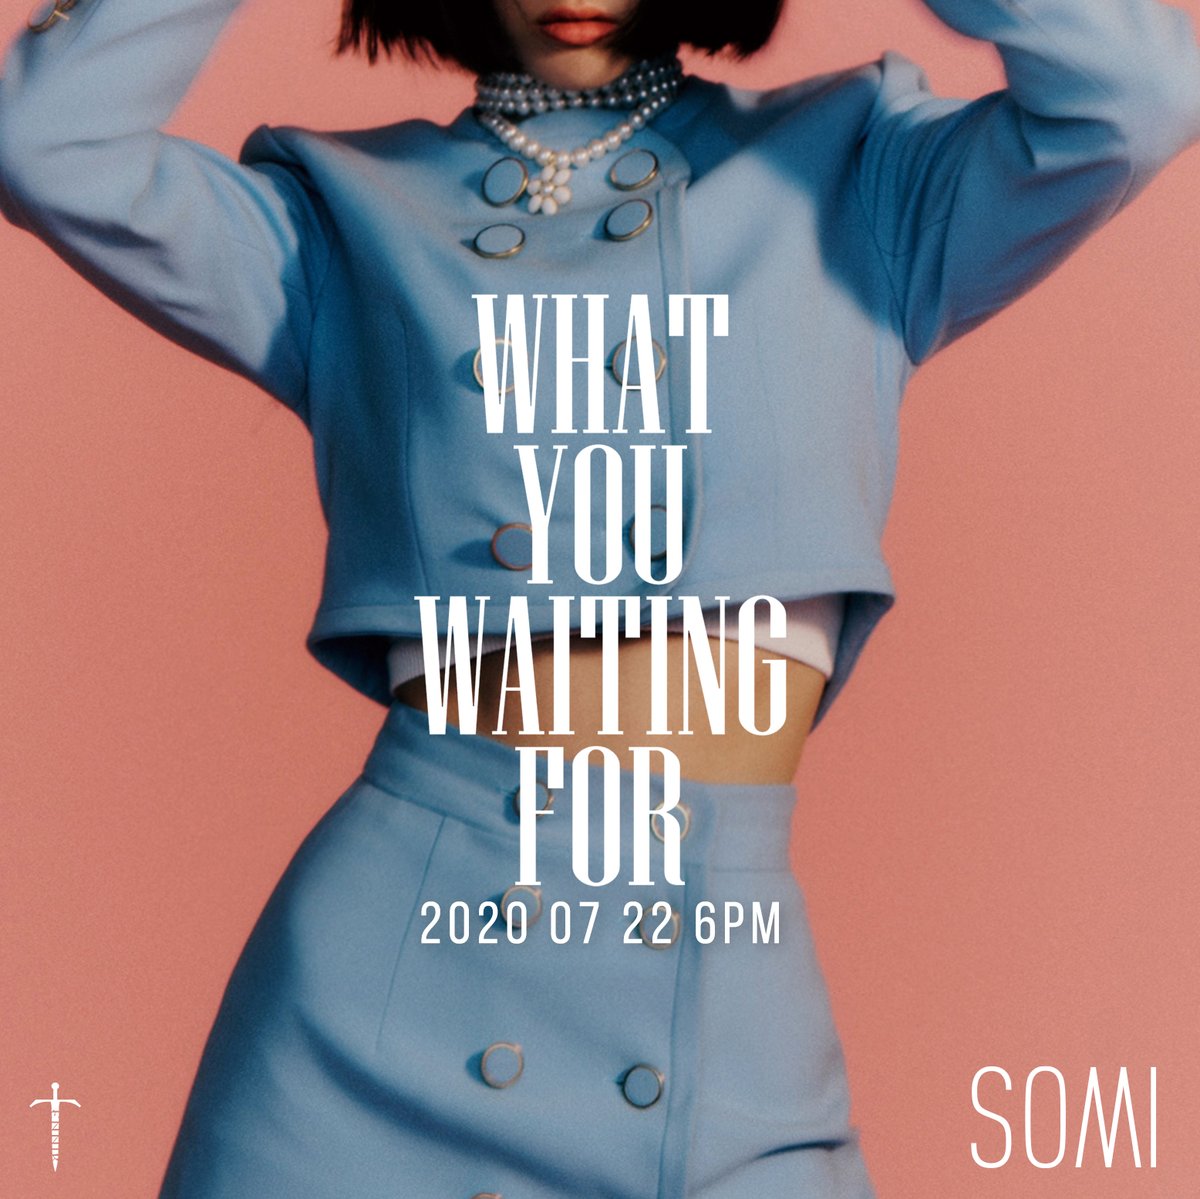 What You Waiting For-SOMI
2020.07.22 6PM(KST)
#SOMI #전소미
#COMEBACK
#TEASERPOSTER
#SINGLE
#RELEASE #THEBLACKLABEL #더블랙레이블
#WHATYOUWAITINGFOR #WWF